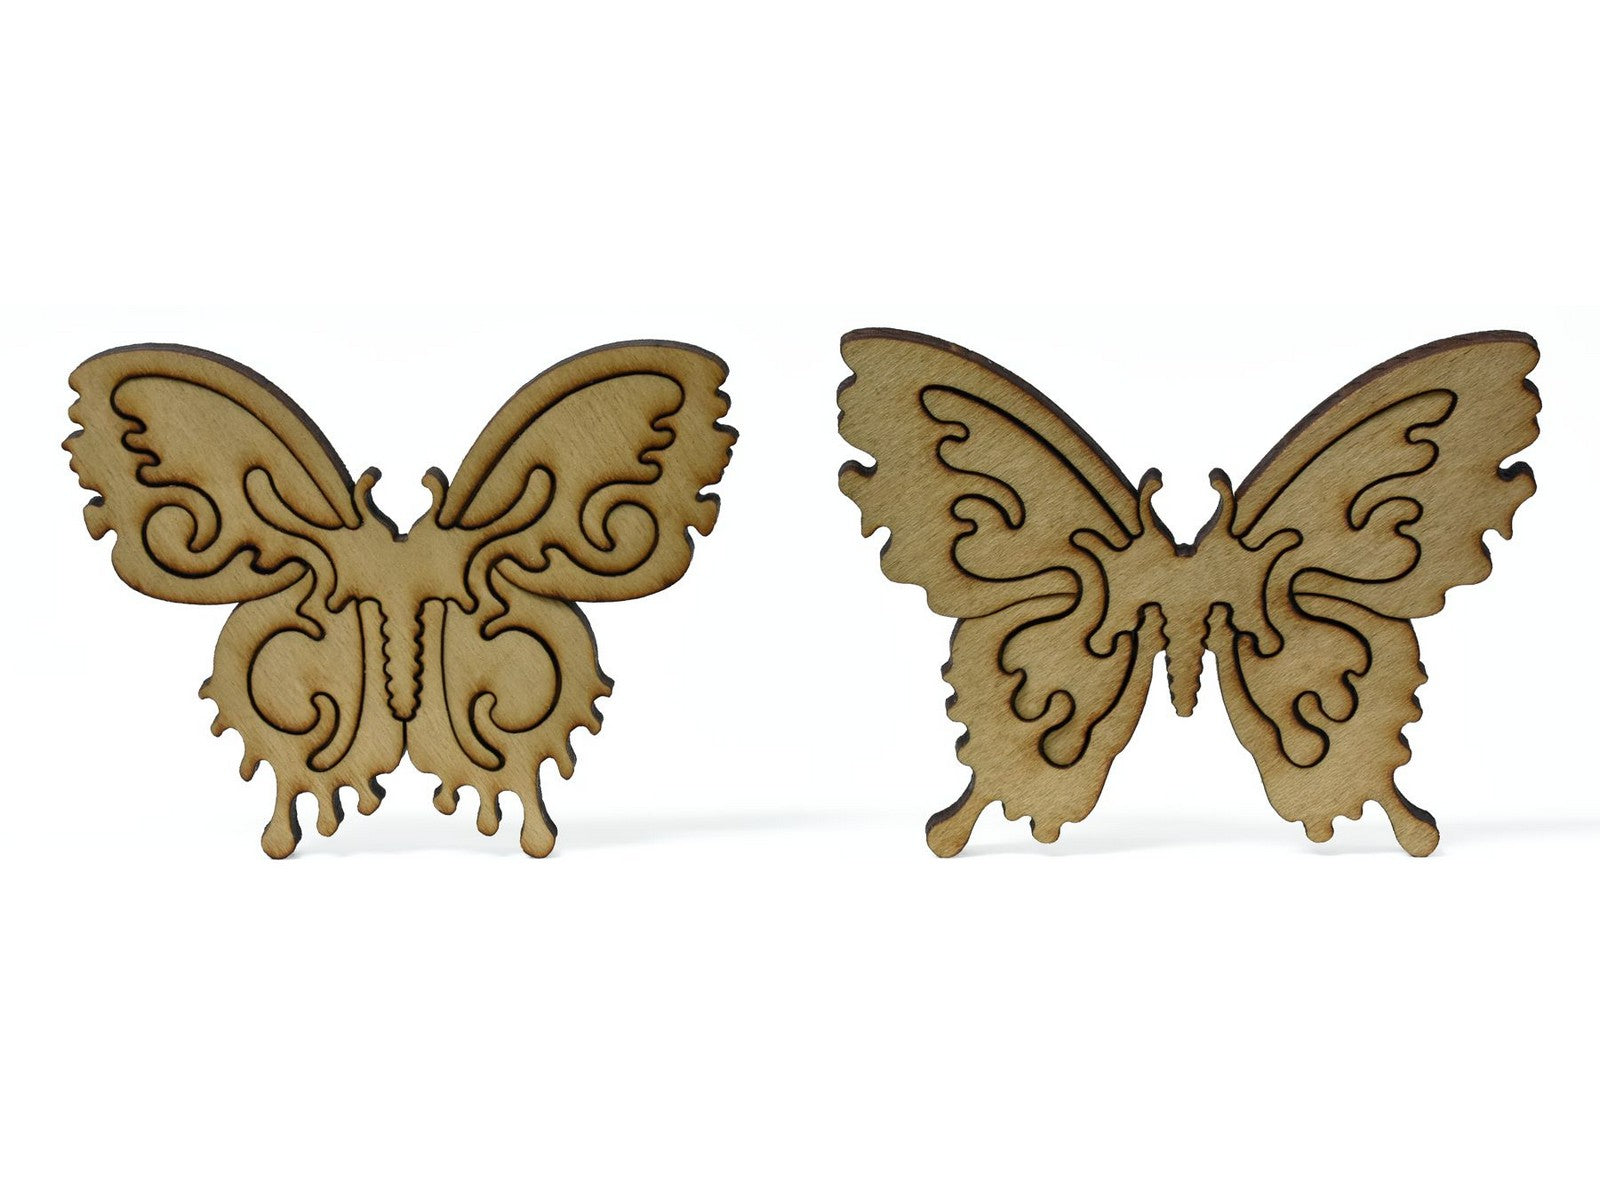 A closeup of pieces showing two butterflies.